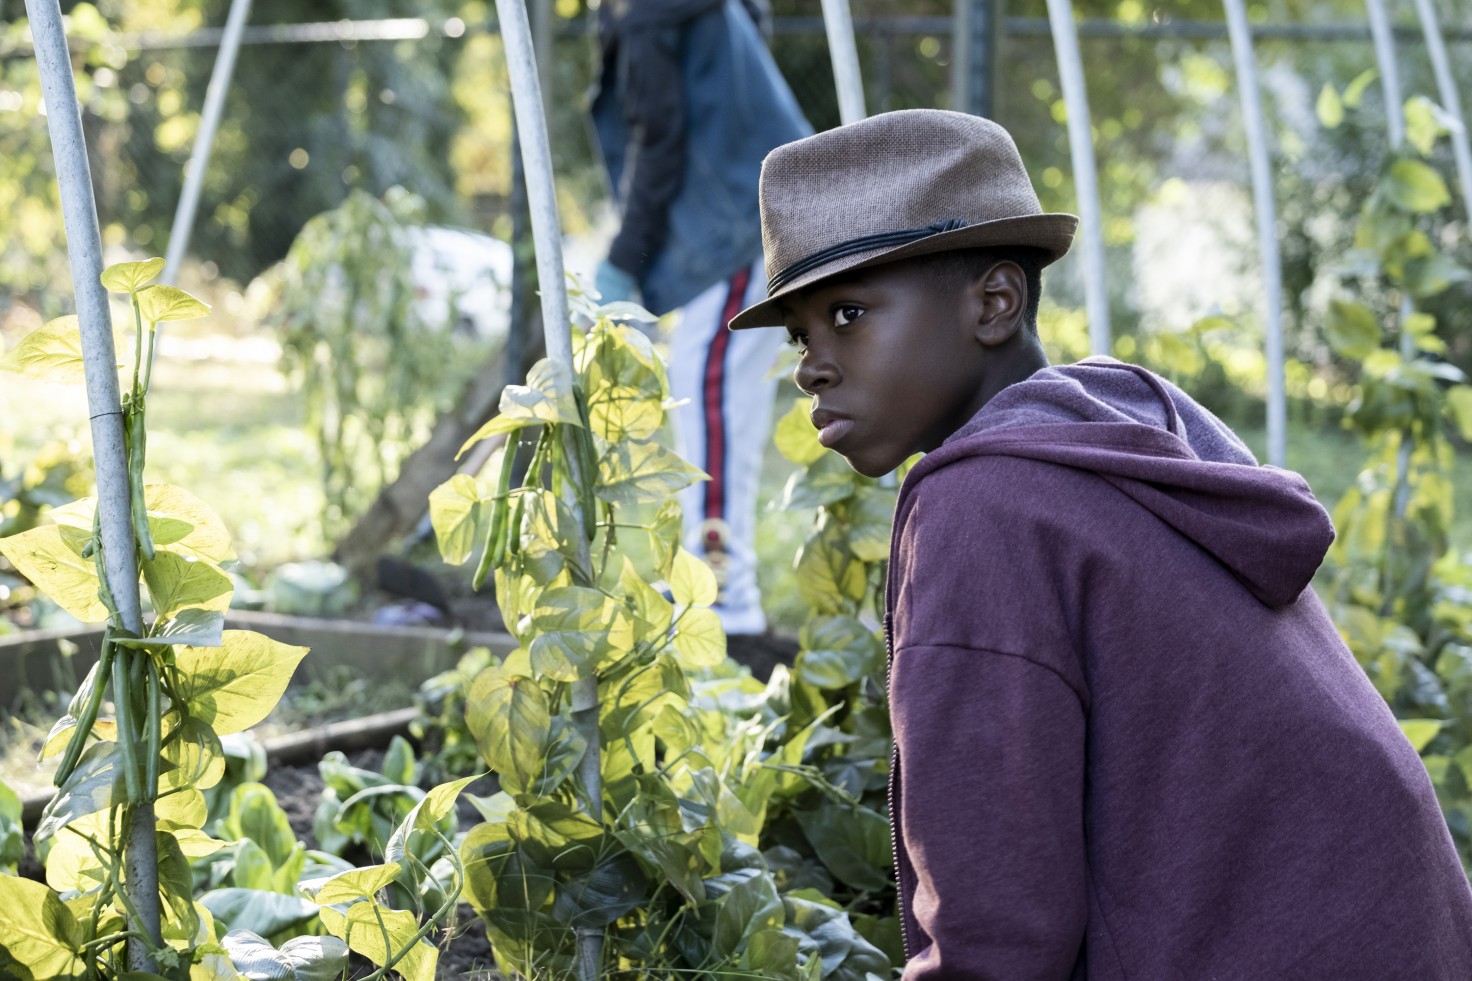 A young black boy in a maroon hoodie and a hat kneels next to a vegetable garden. His gaze is directed offscreen.